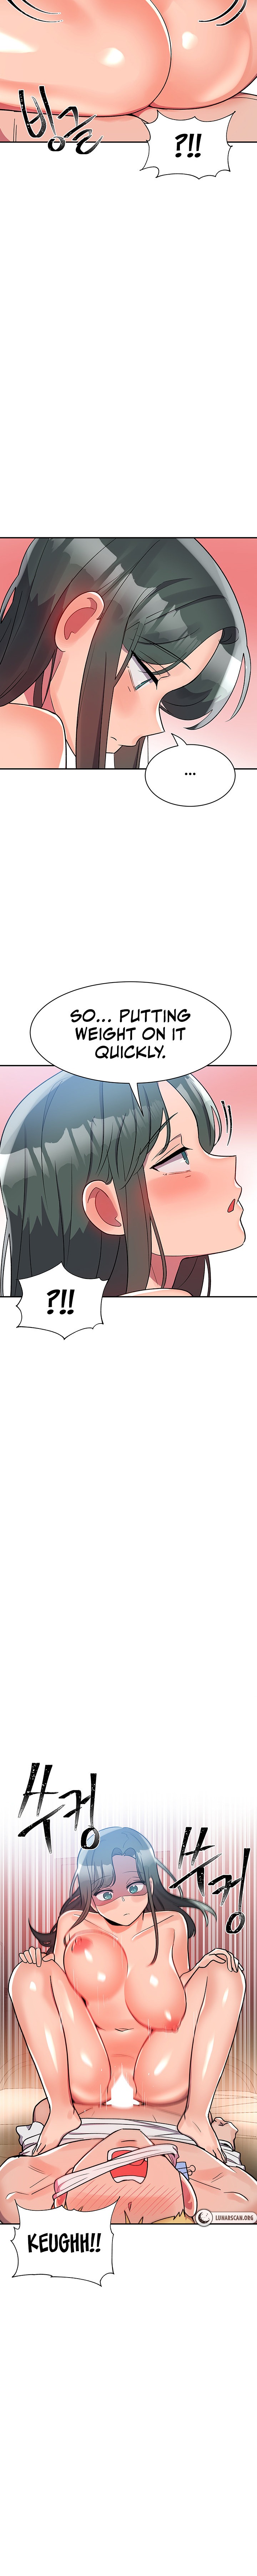 Relationship Reverse Button: Let’s Educate That Arrogant Girl - Chapter 7 Page 10